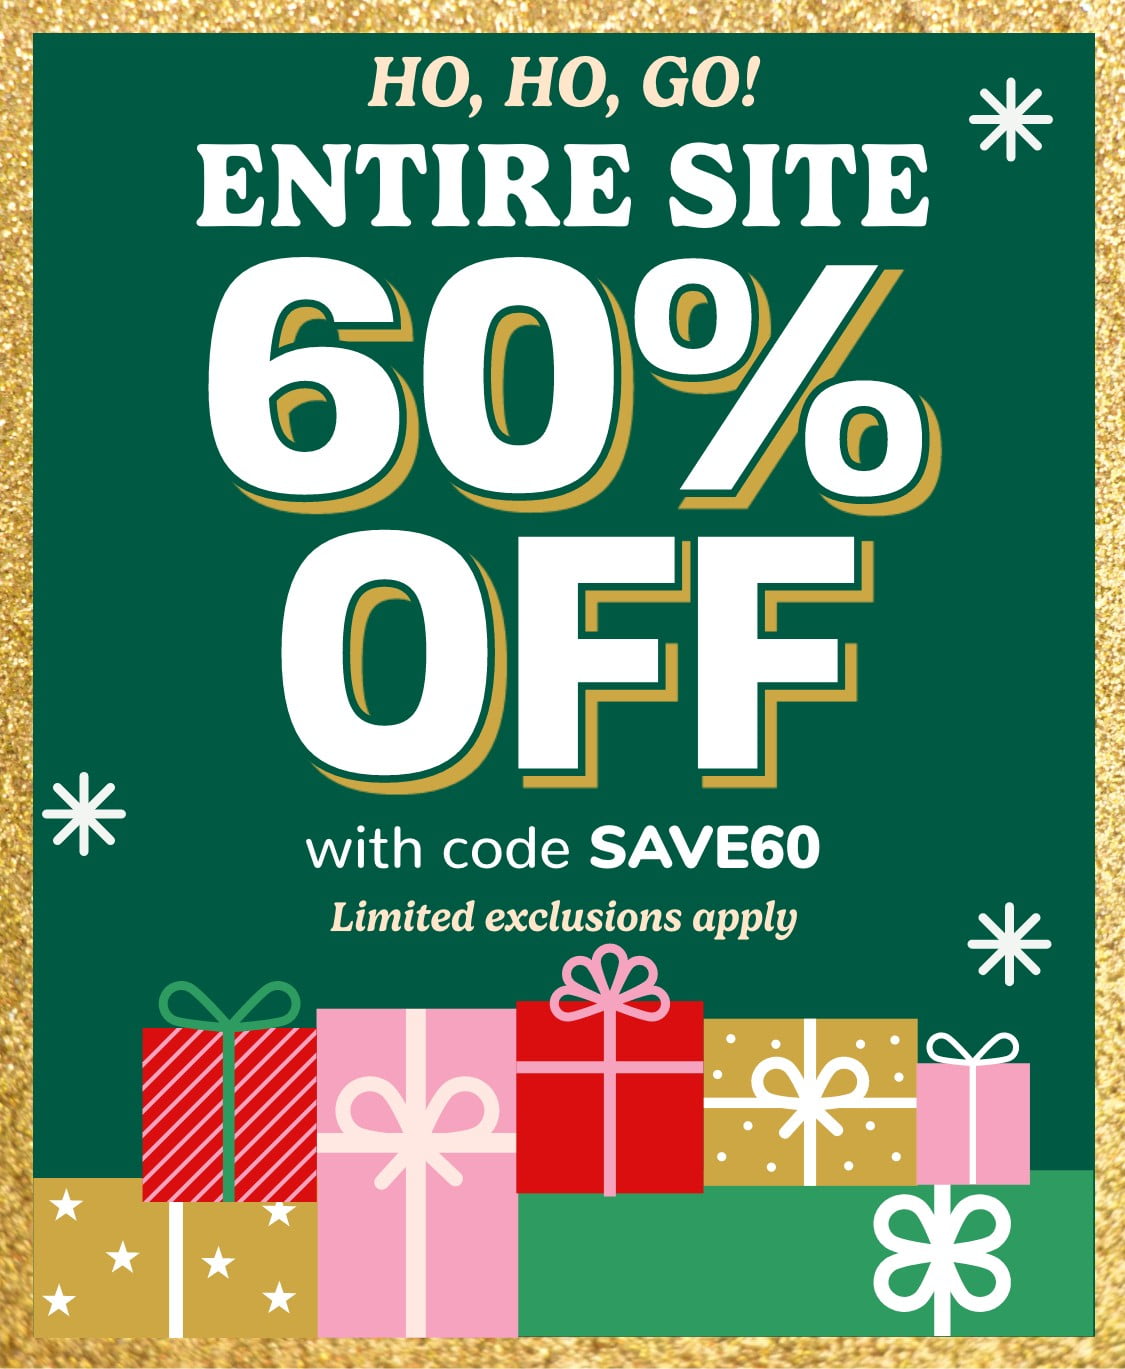 Ho,Ho Go! Entire Site 60% off with code SAVE60 Limited exclusions apply